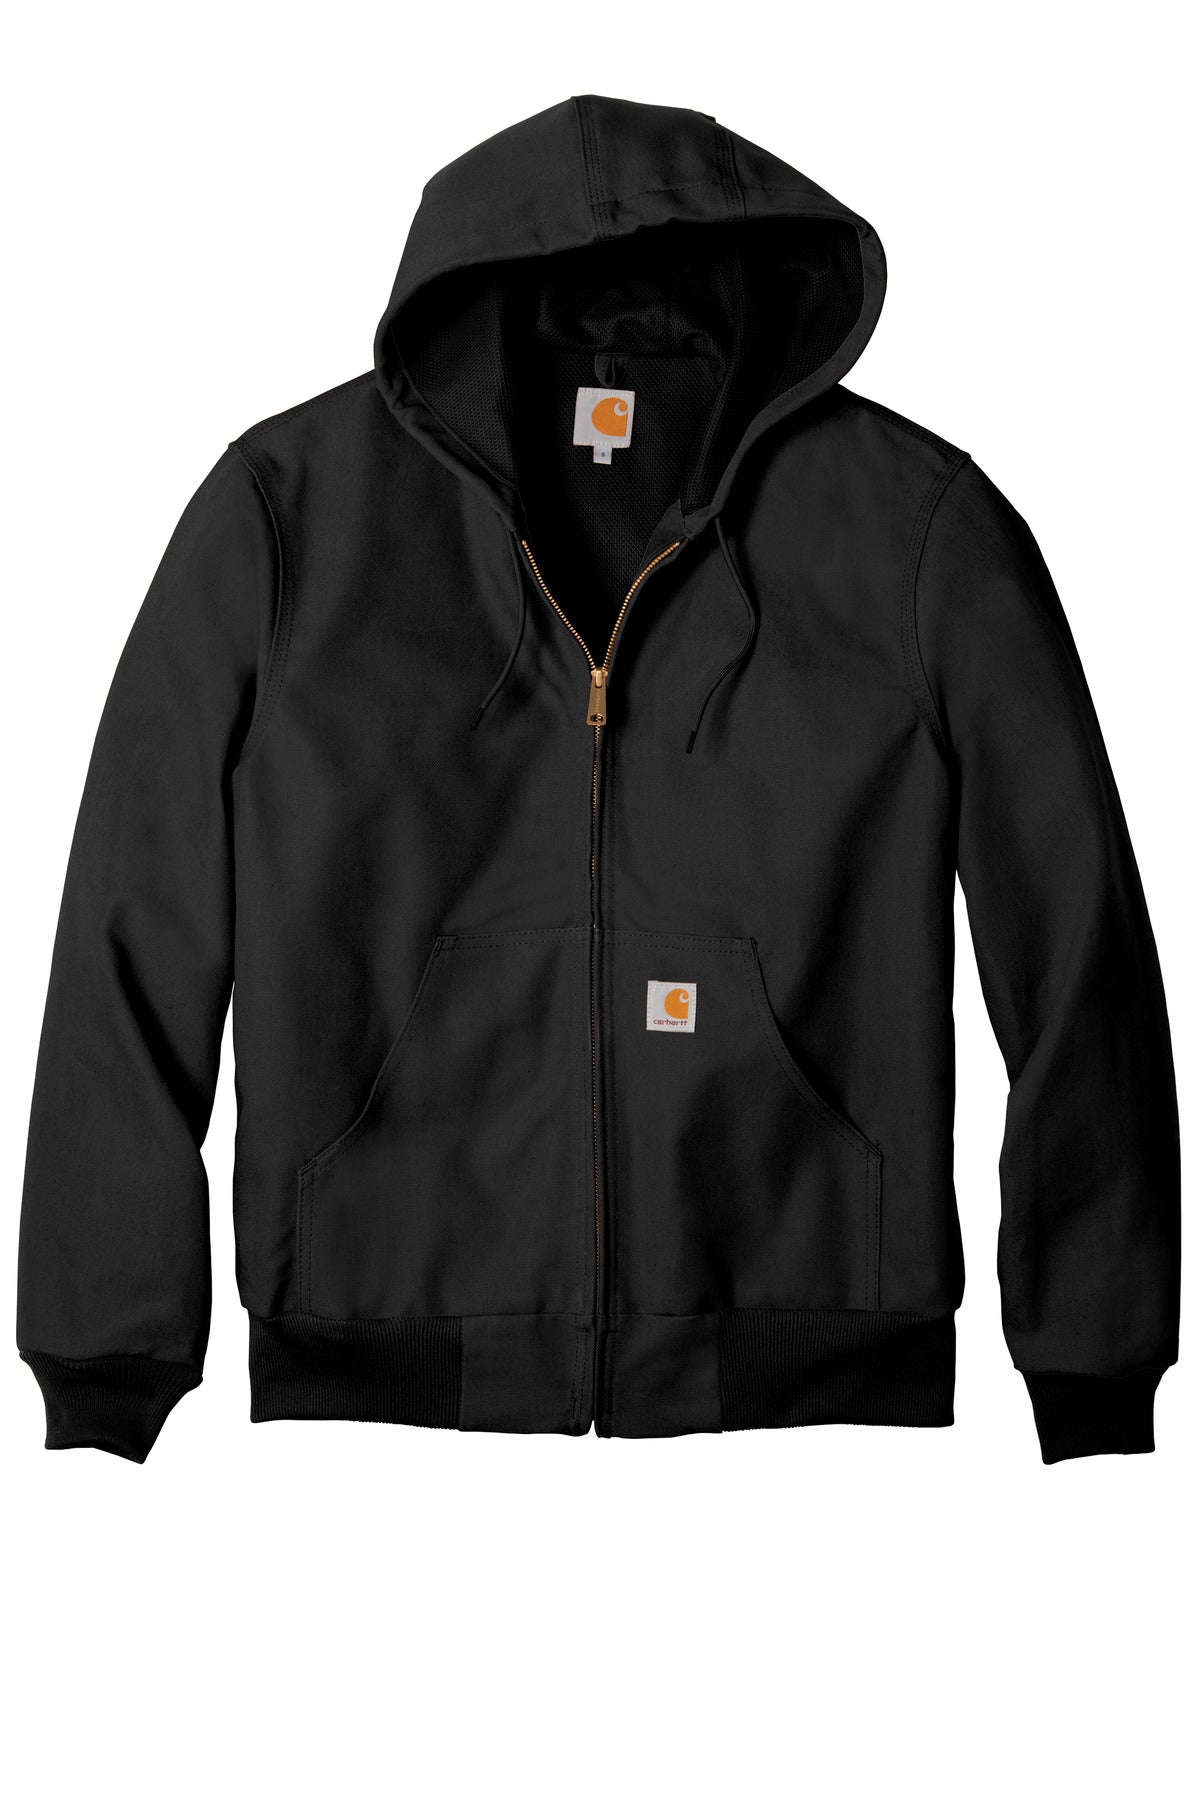 Carhartt  Tall Thermal-Lined Duck Active Jac. CTTJ131